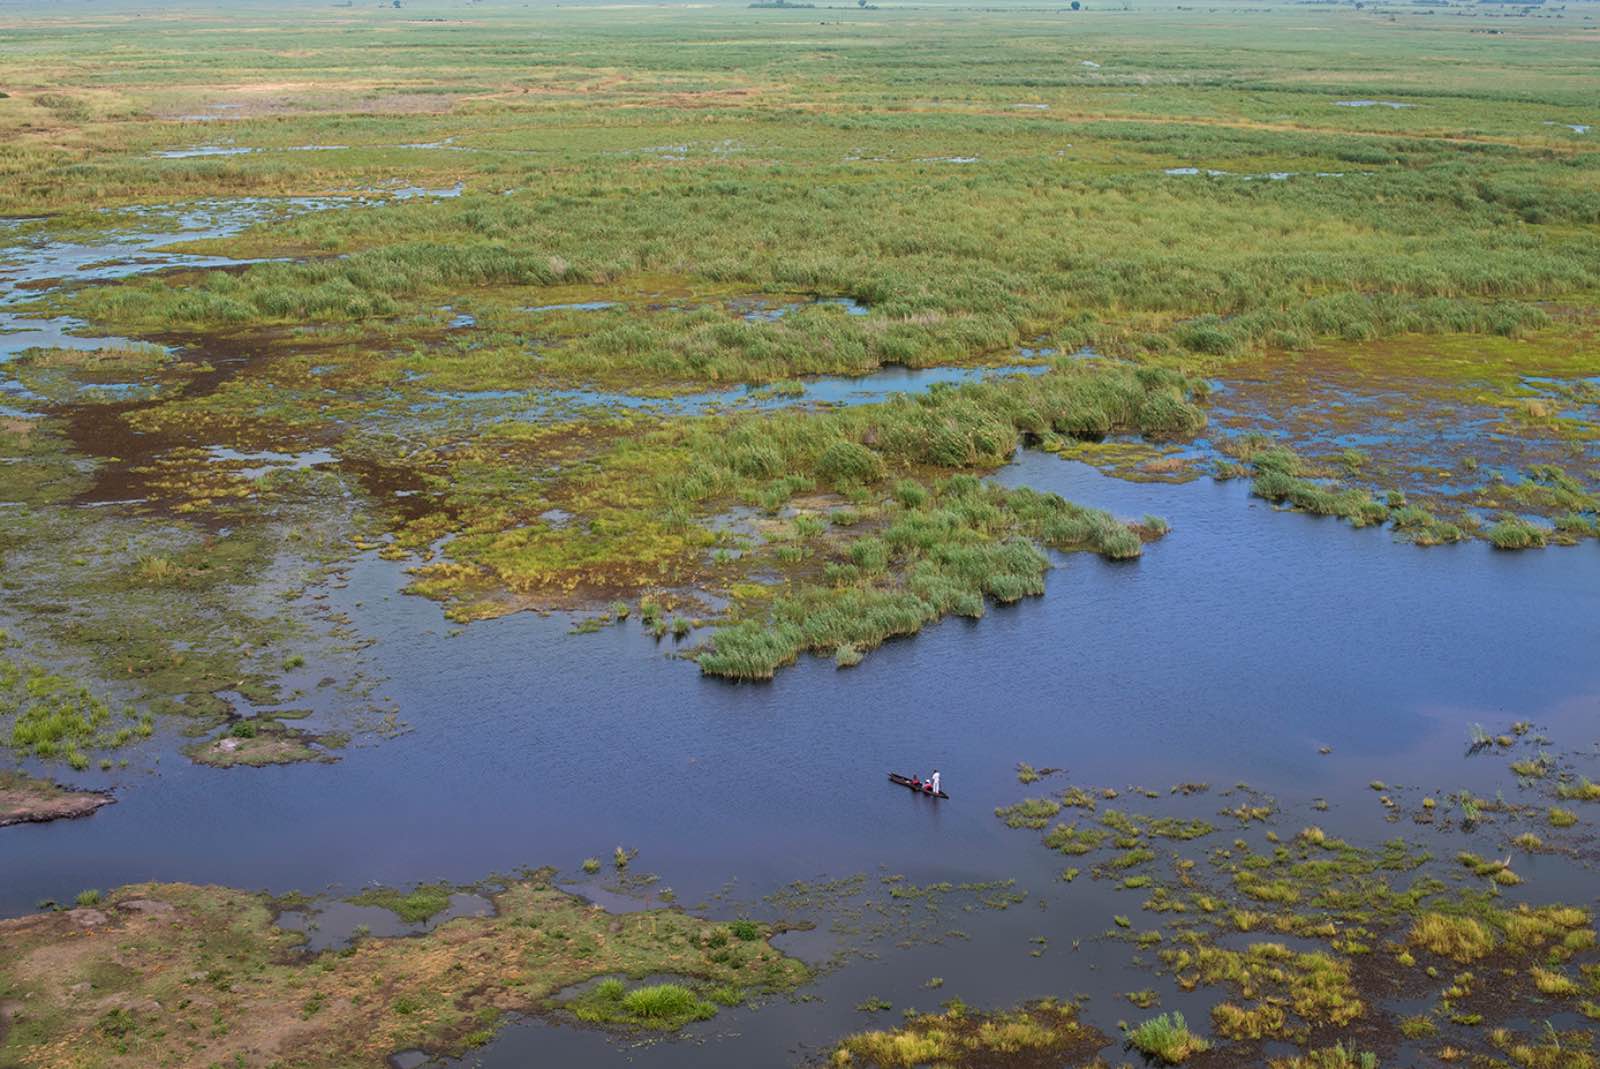 Aerial view of Linyanti swamps with guests on a peaceful mokoro cruise through the lagoon